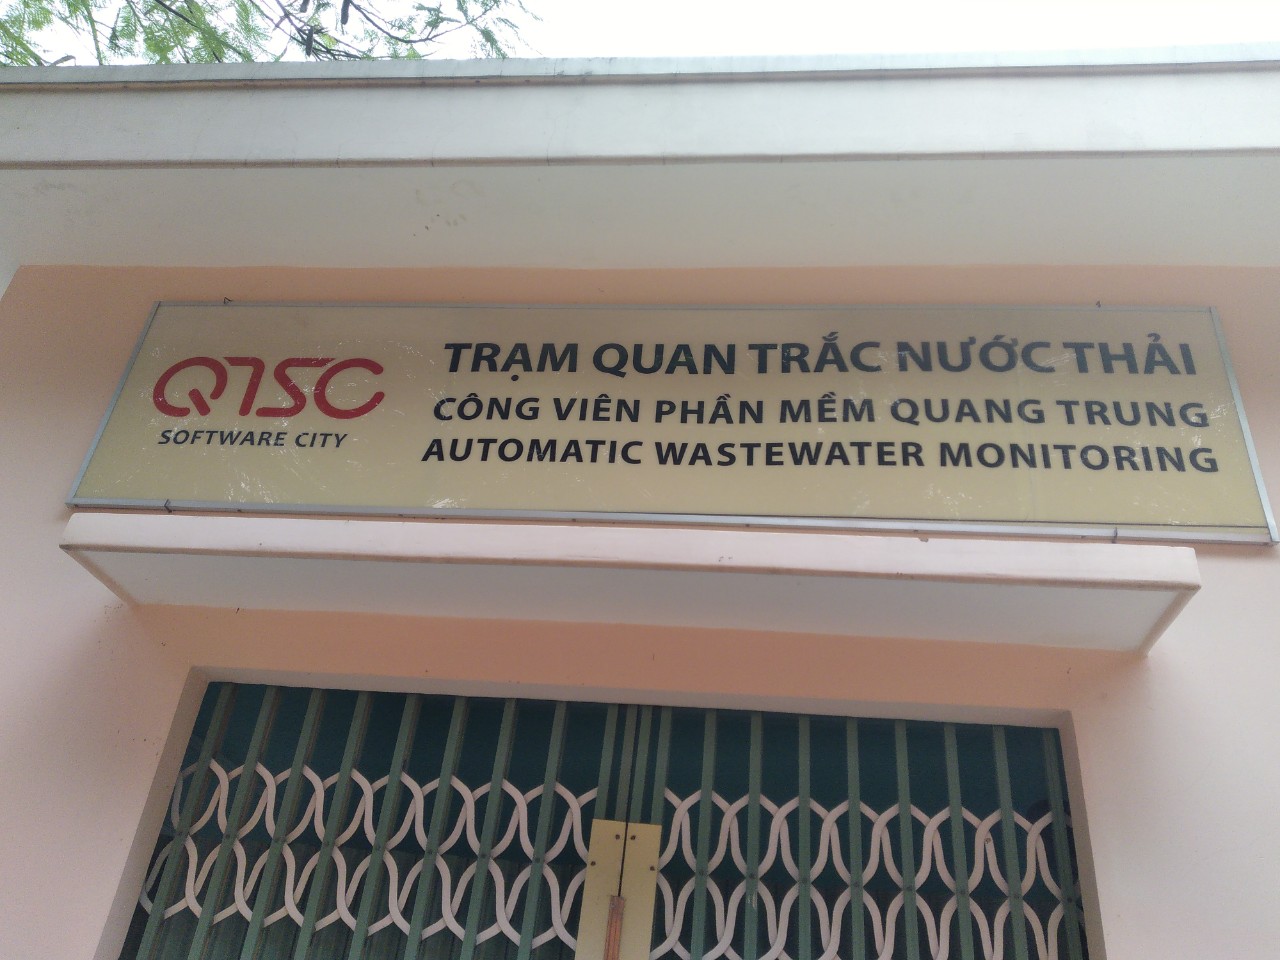 Image 6: The automatic wastewater monitoring station at QTSC